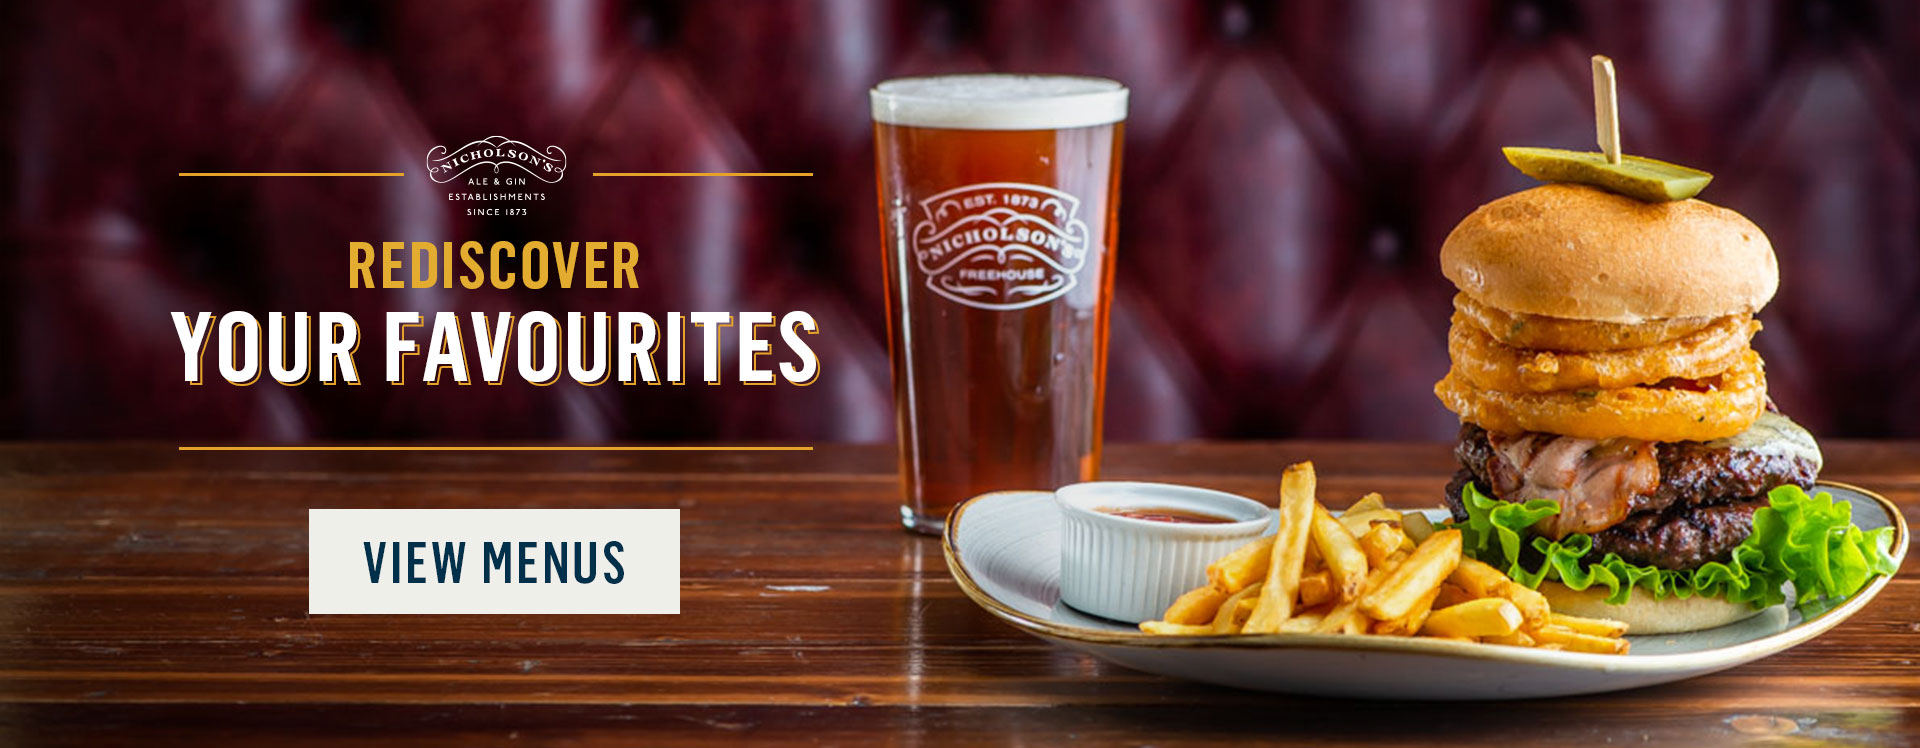 Rediscover your favourites at The St George's Tavern